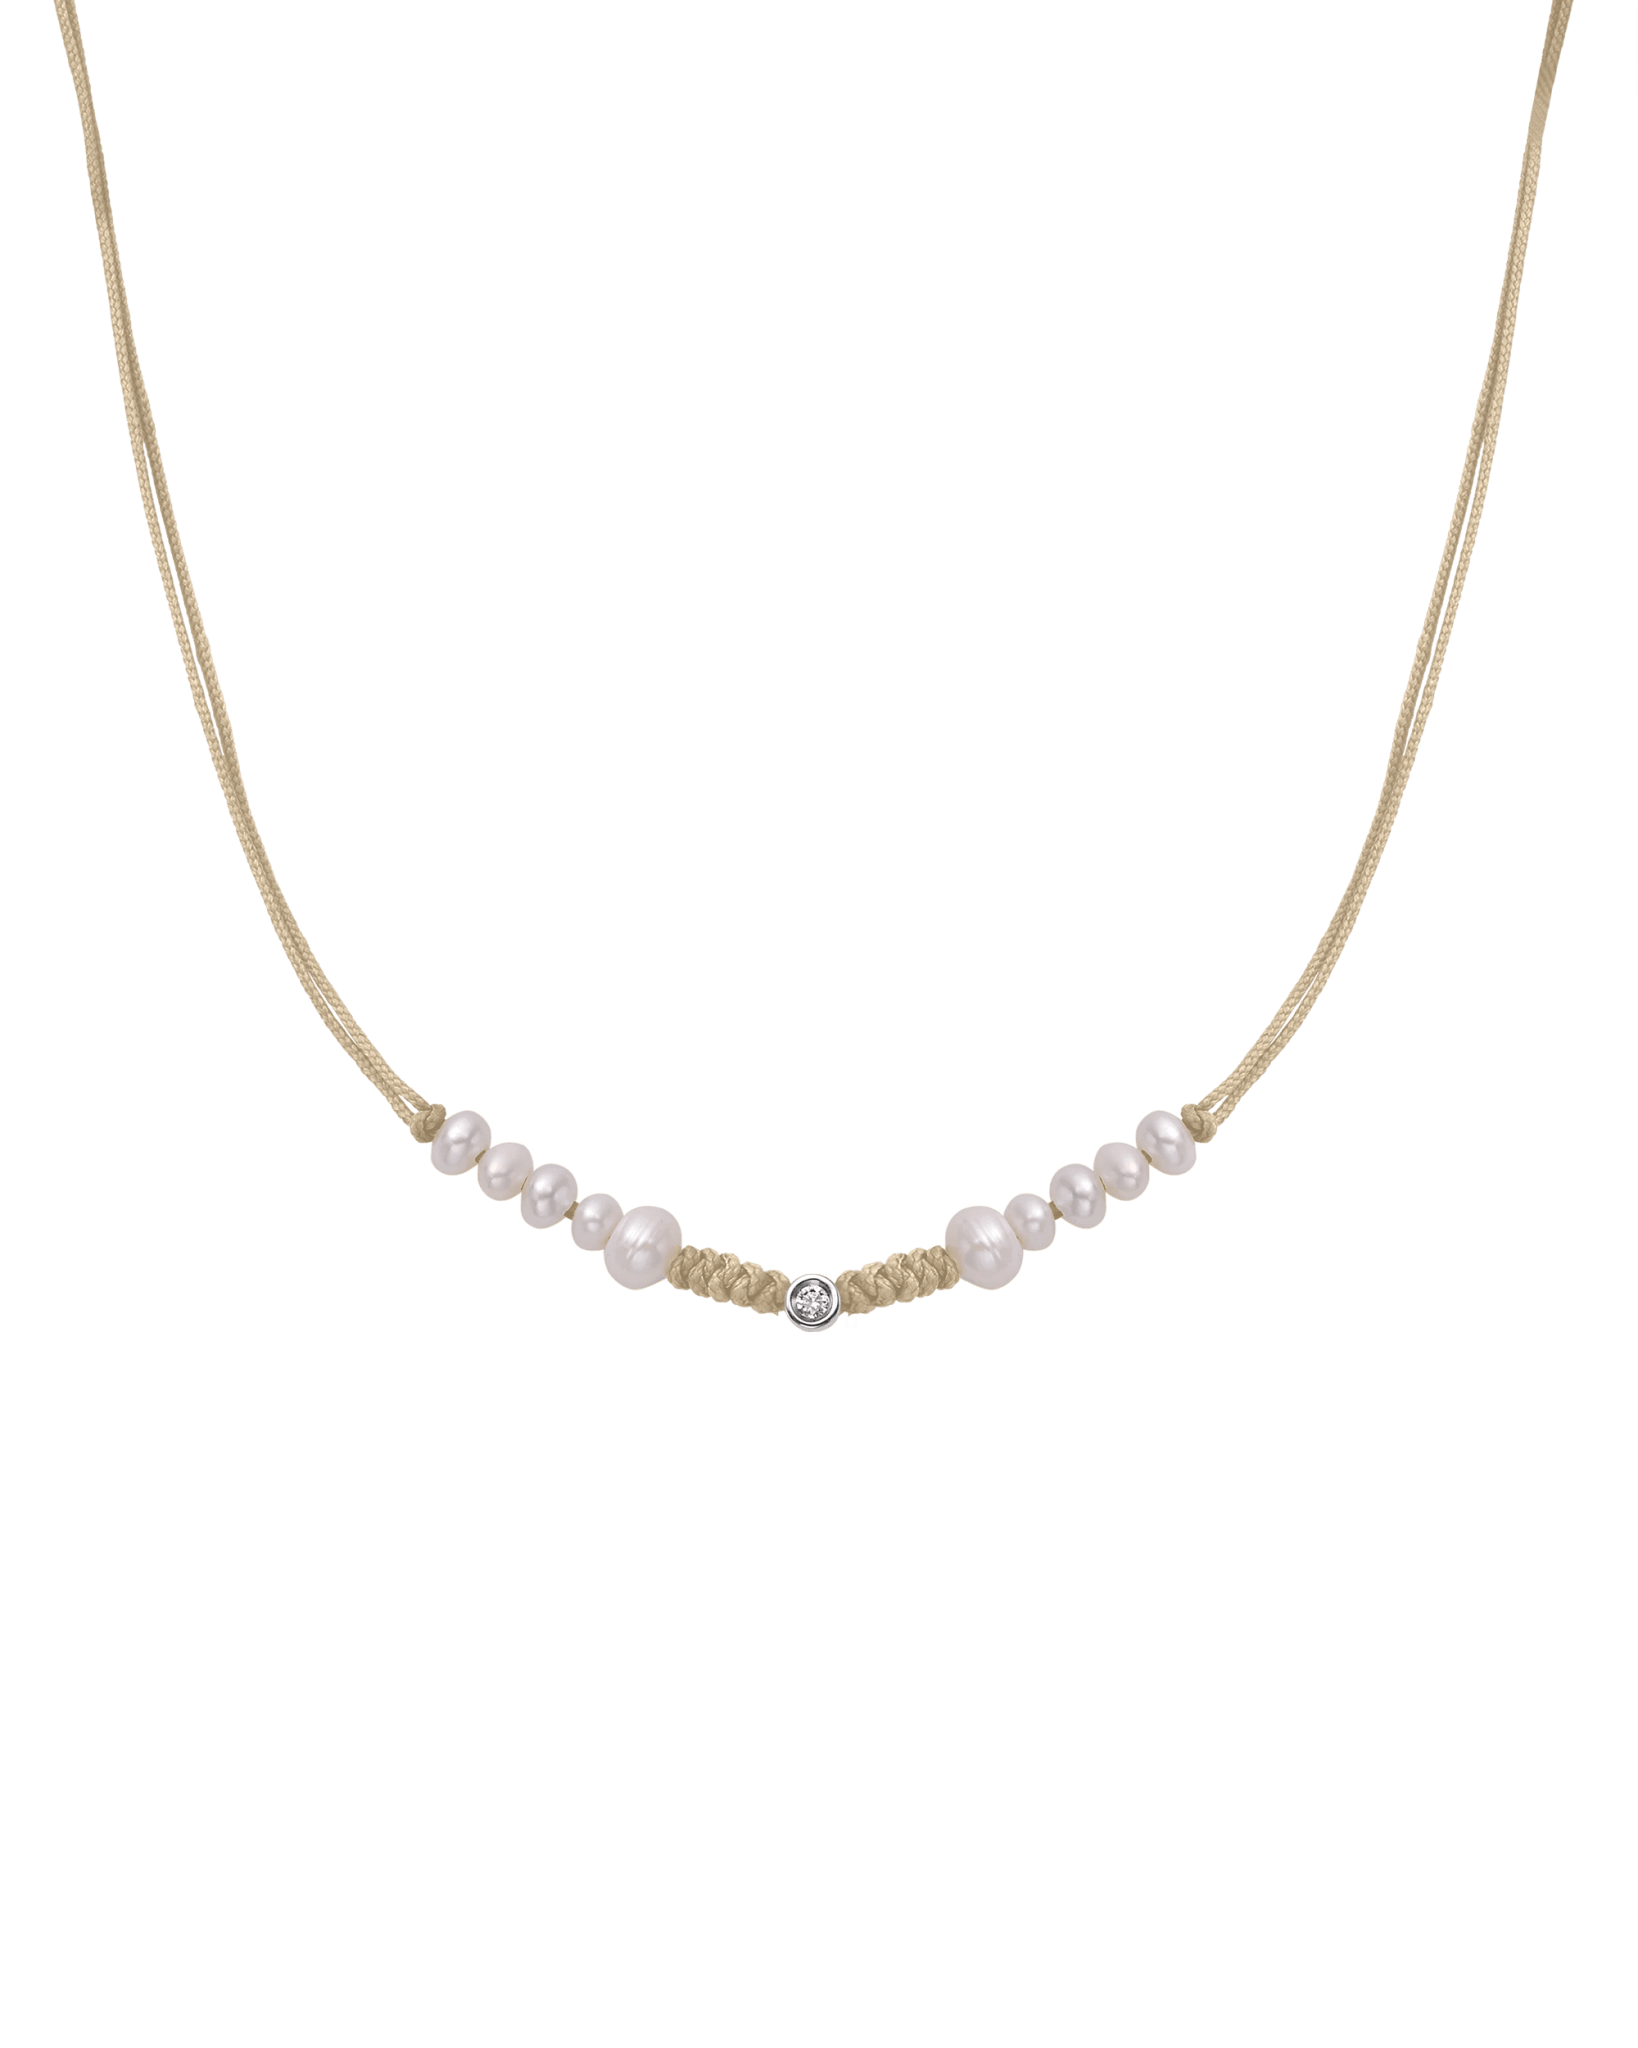 Ten Natural Pearl String of Love Necklace - 14K White Gold Necklaces 14K Solid Gold Beige Small: 0.03ct 